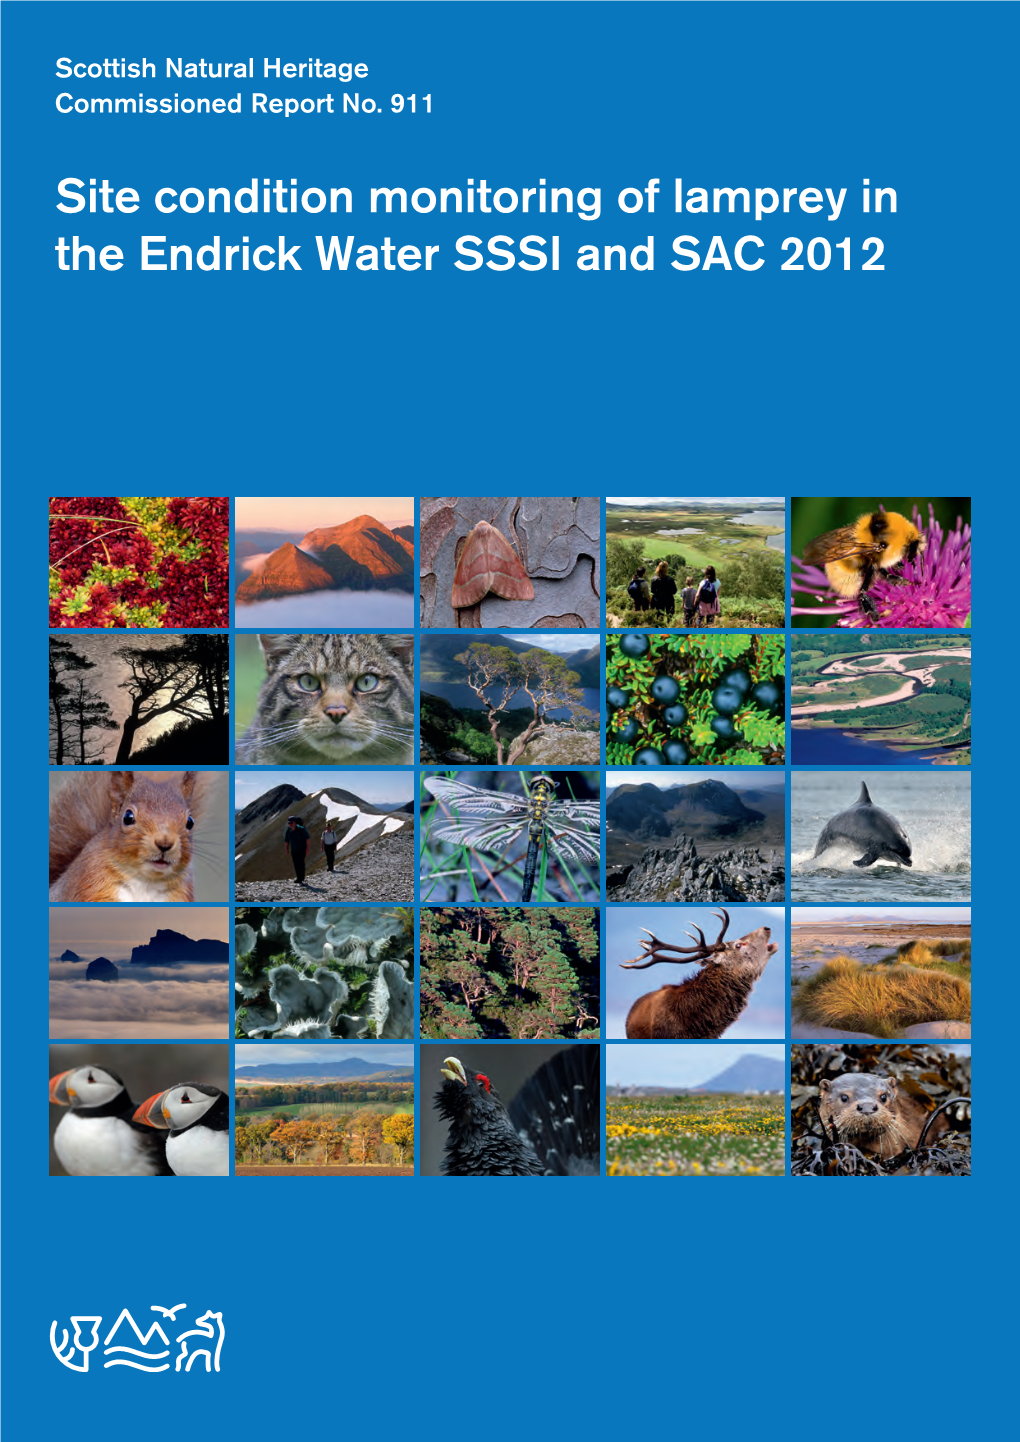 Site Condition Monitoring of Lamprey in the Endrick Water SSSI and SAC 2012